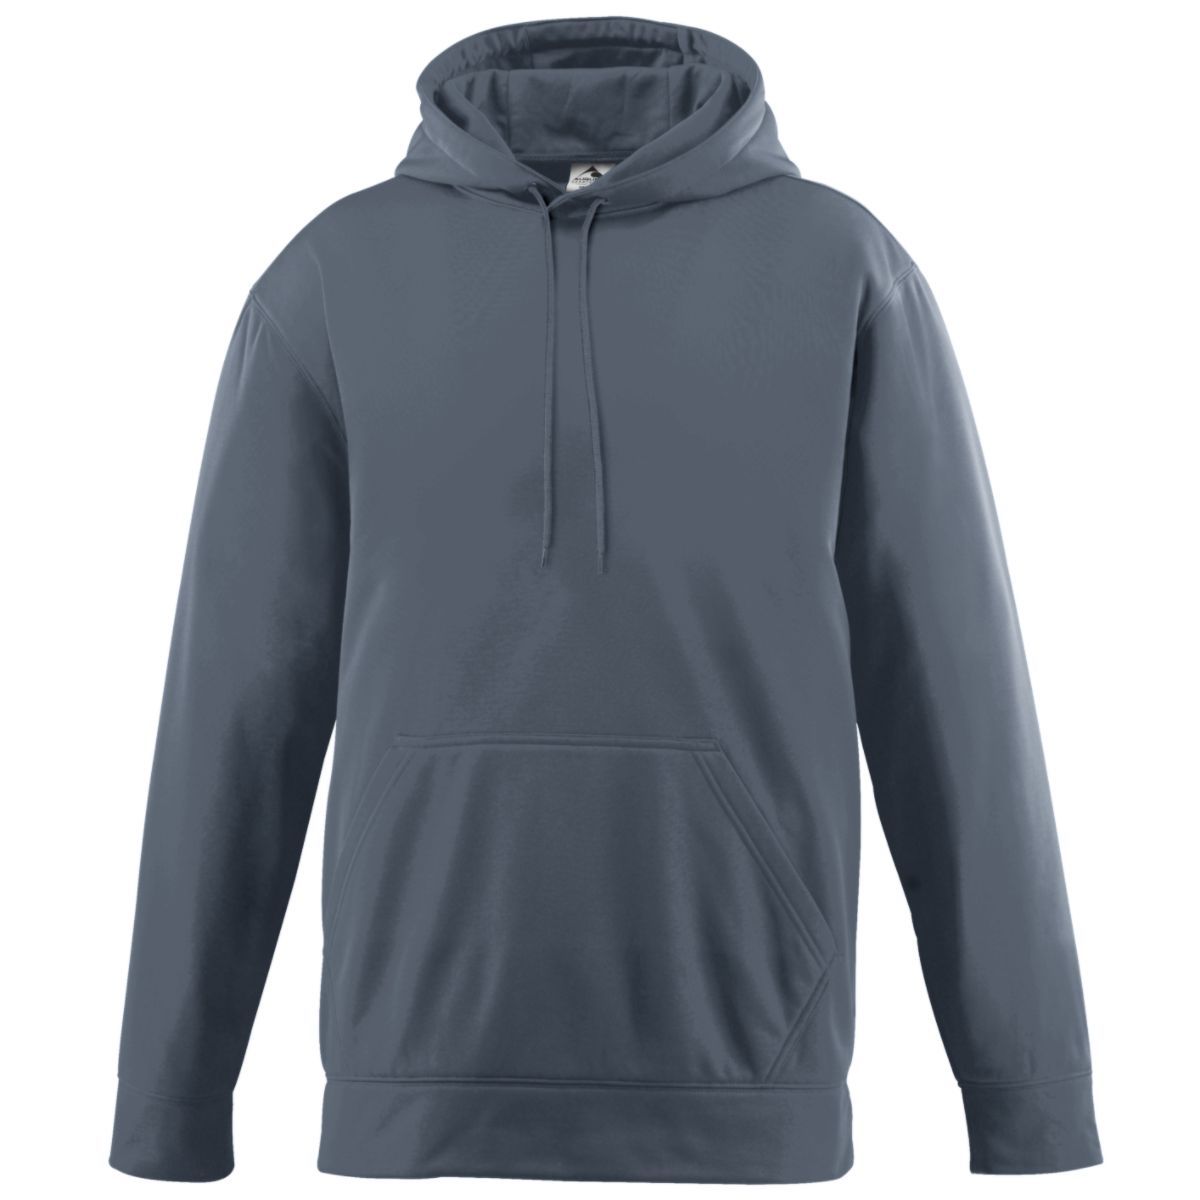 Augusta Sportswear Youth Wicking  Fleece Hoodie in Graphite  -Part of the Youth, Youth-Sweatshirt, Augusta-Products, Outerwear product lines at KanaleyCreations.com